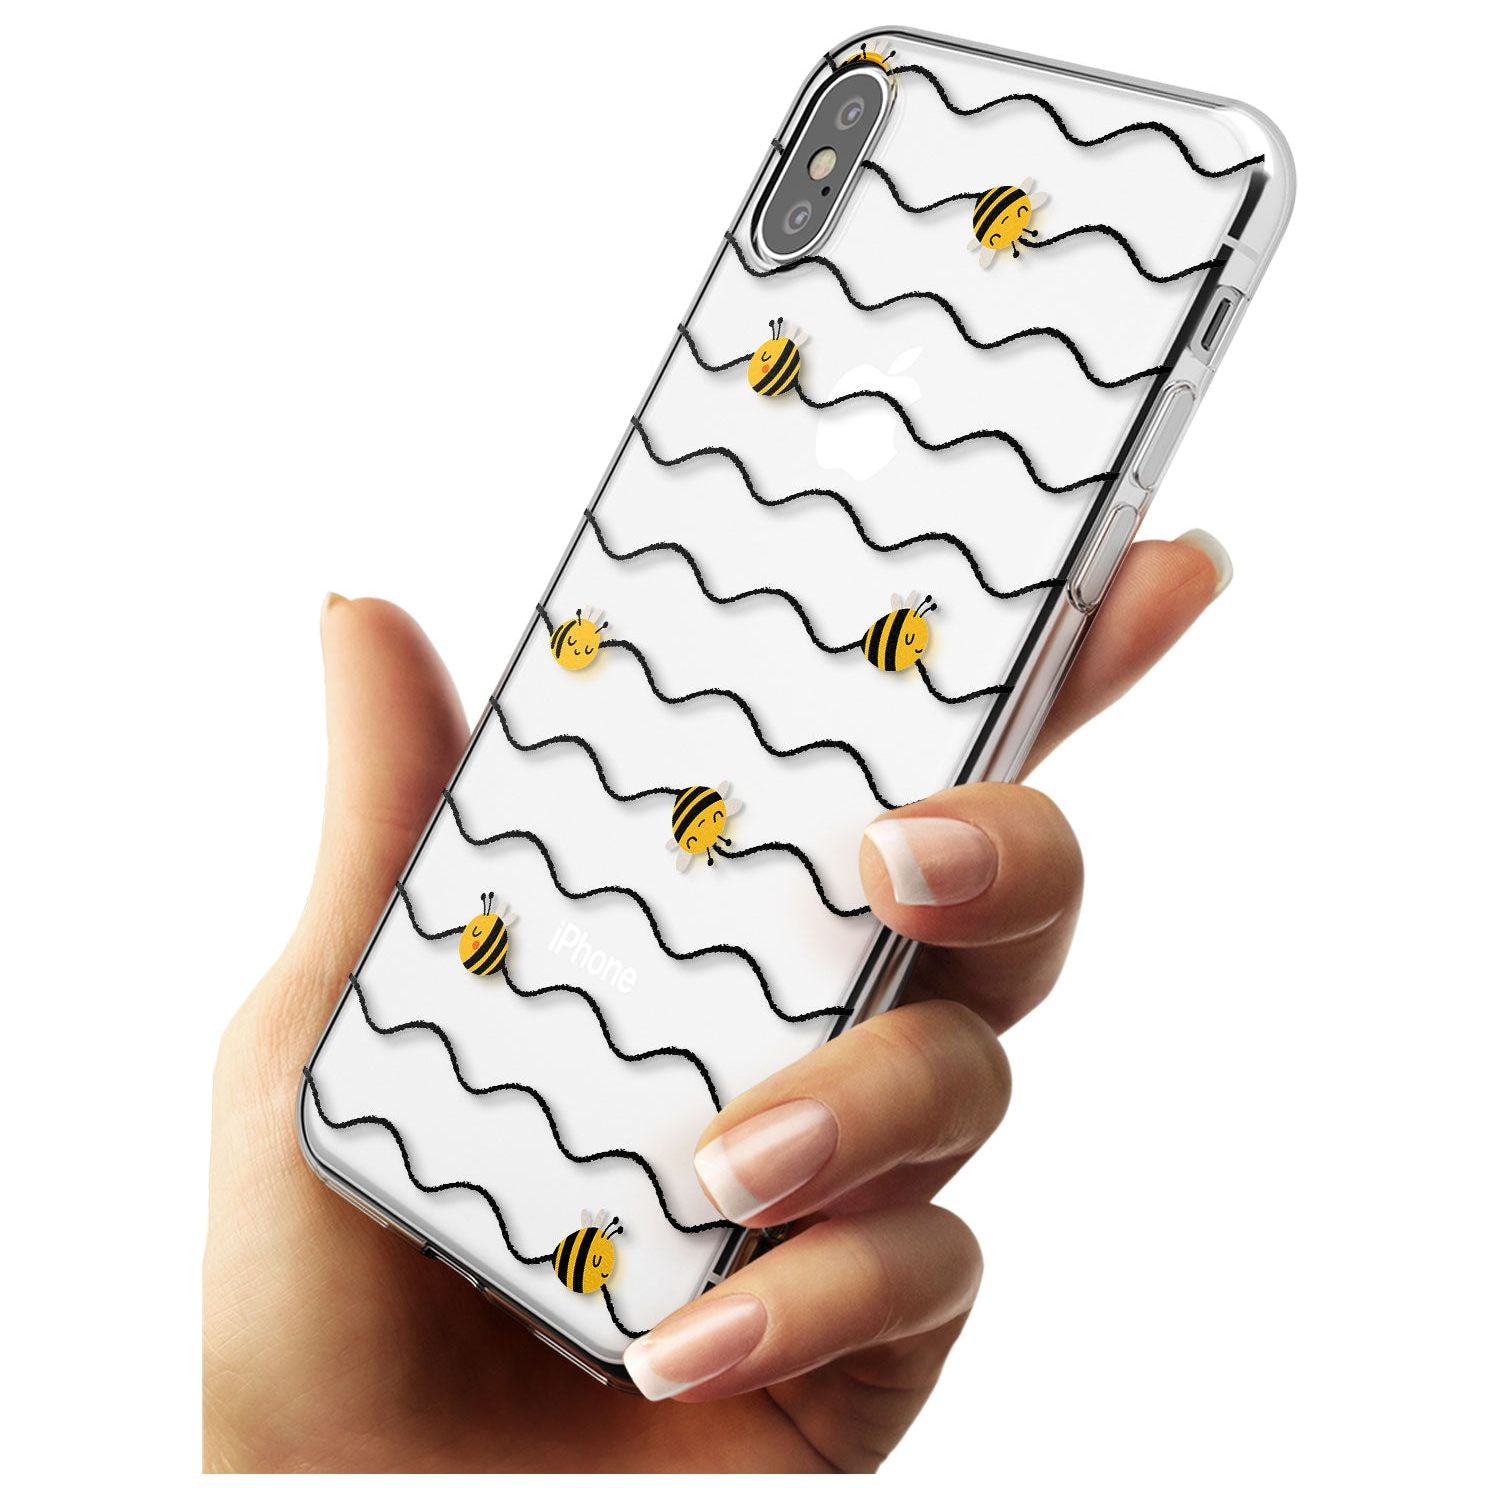 Sweet as Honey Patterns: Bees & Stripes (Clear) Slim TPU Phone Case Warehouse X XS Max XR